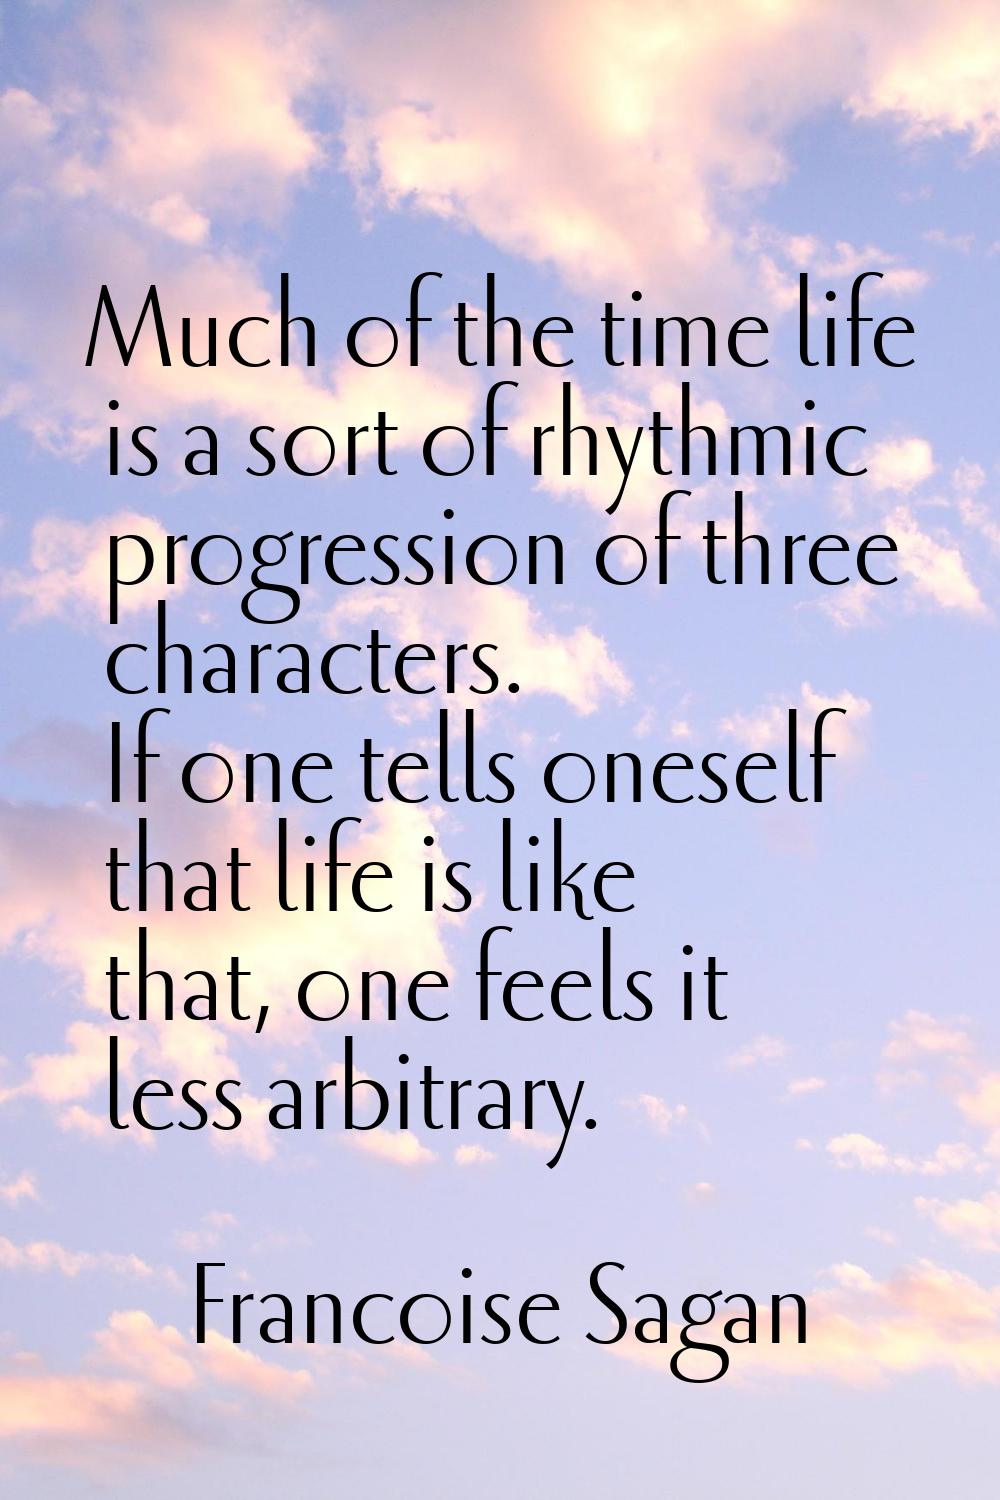 Much of the time life is a sort of rhythmic progression of three characters. If one tells oneself t